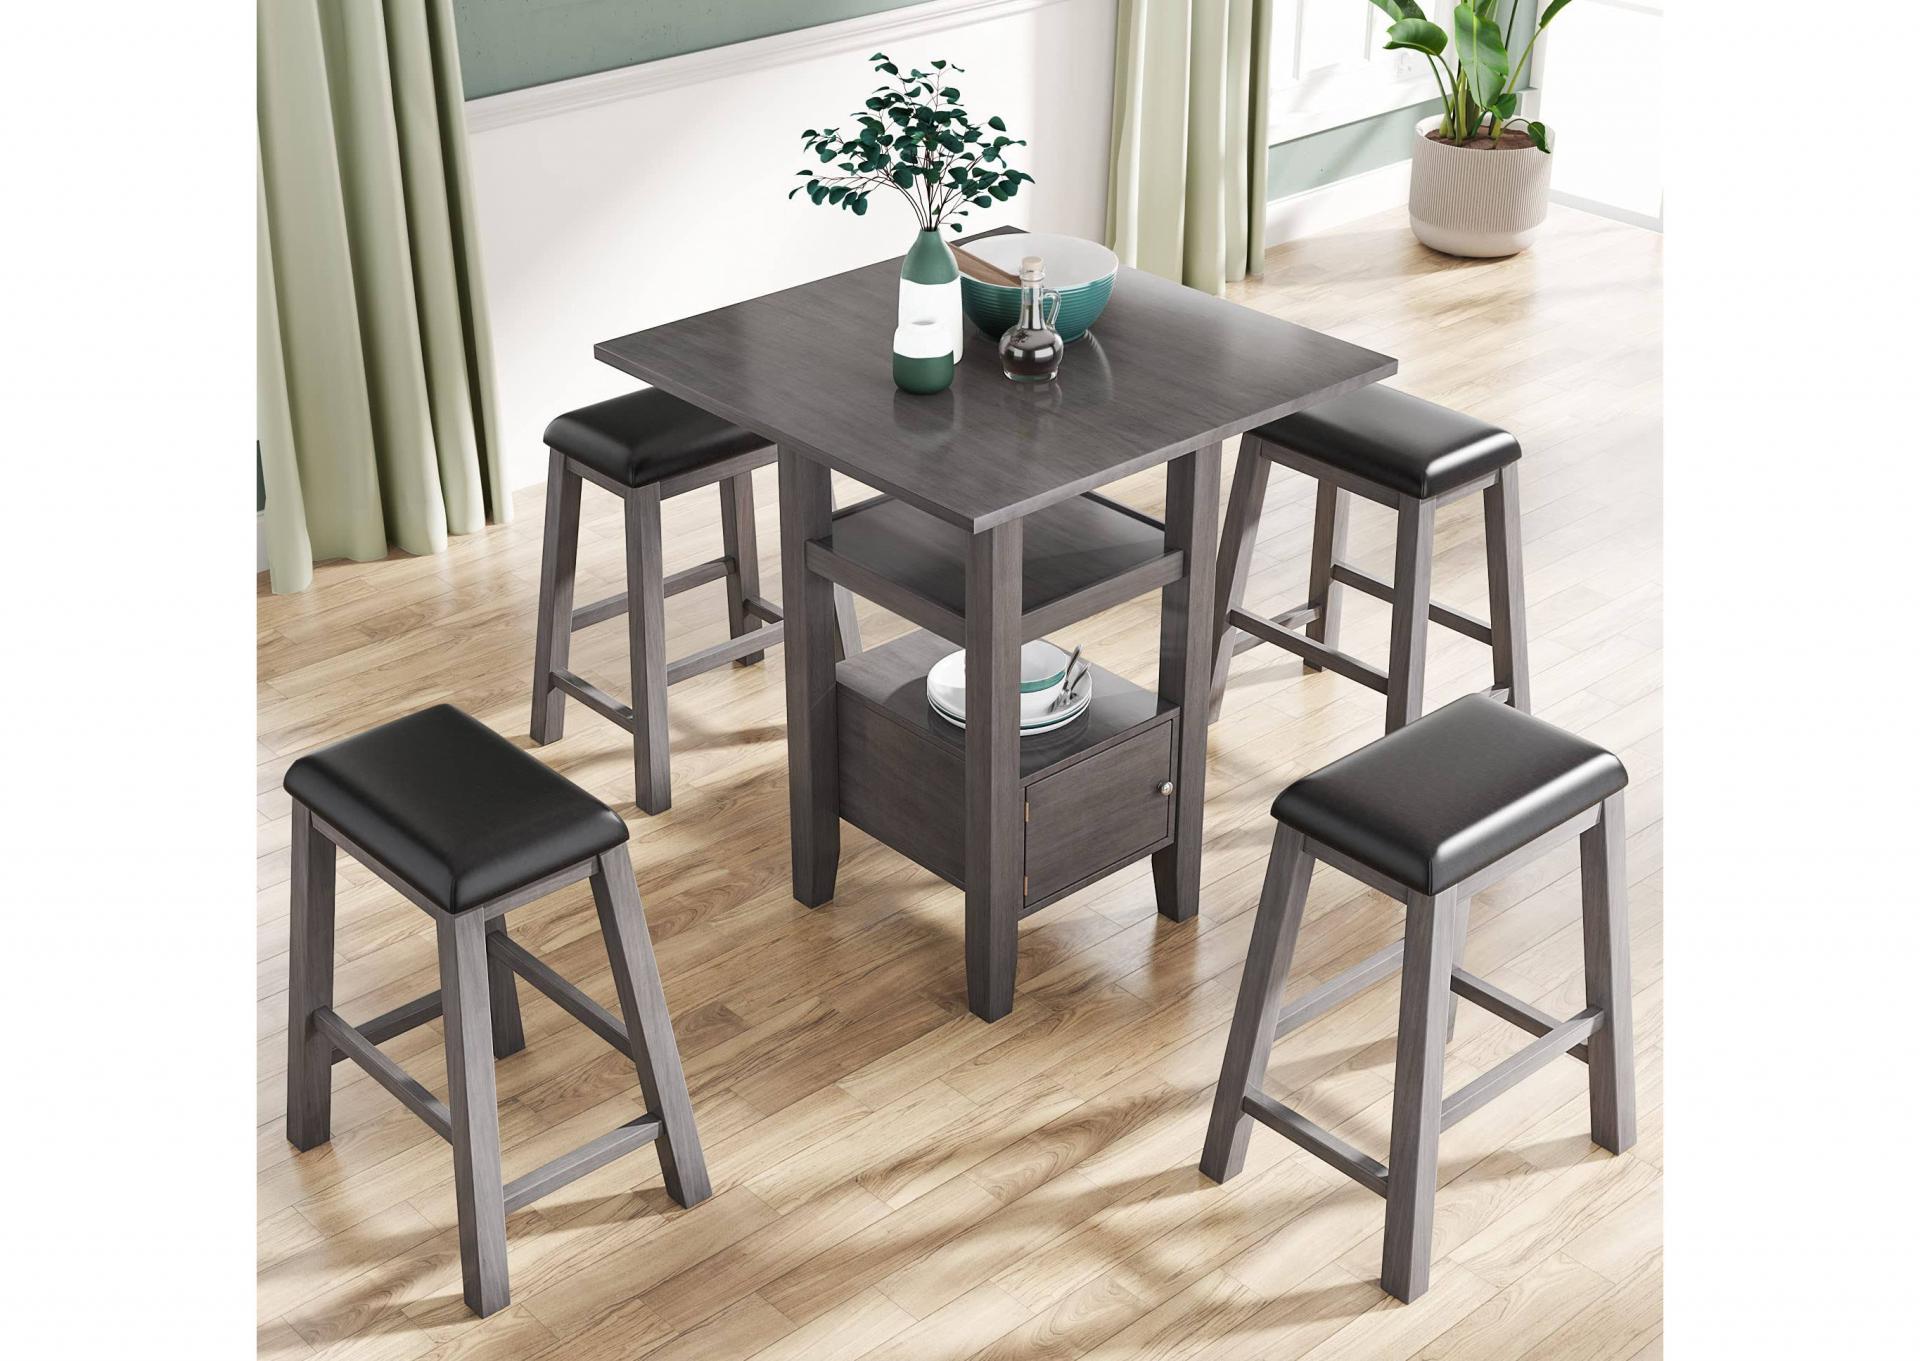 Renaissance 5 PC Table Set with Storage & Upholstered Stools,Digital Retail Experience